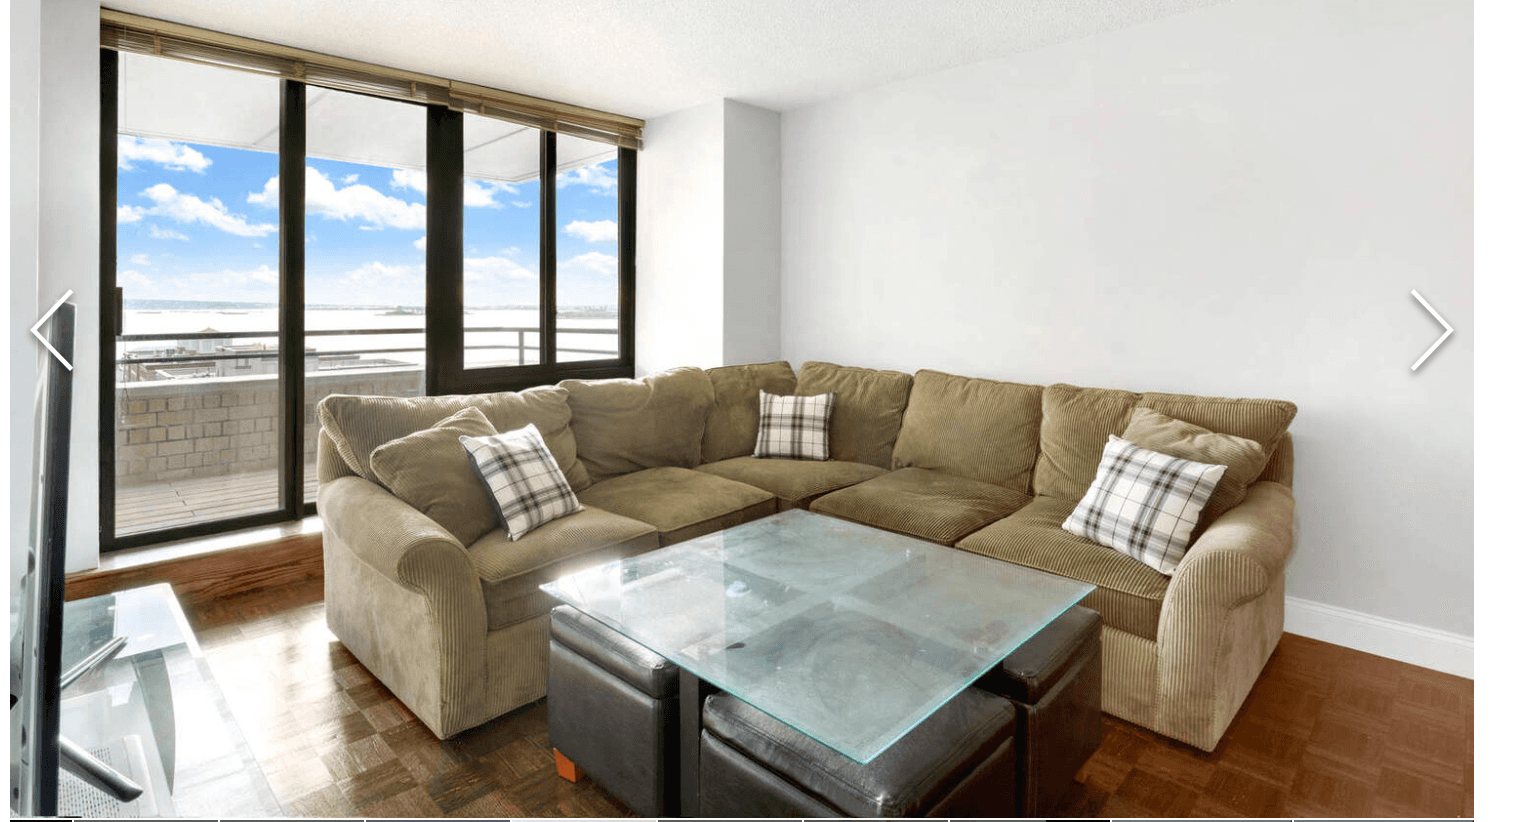 Come home to this spacious one bedroom with hardwood flooring, ample closet space and a private balcony that boasts spectacular views of the Statue of Liberty.